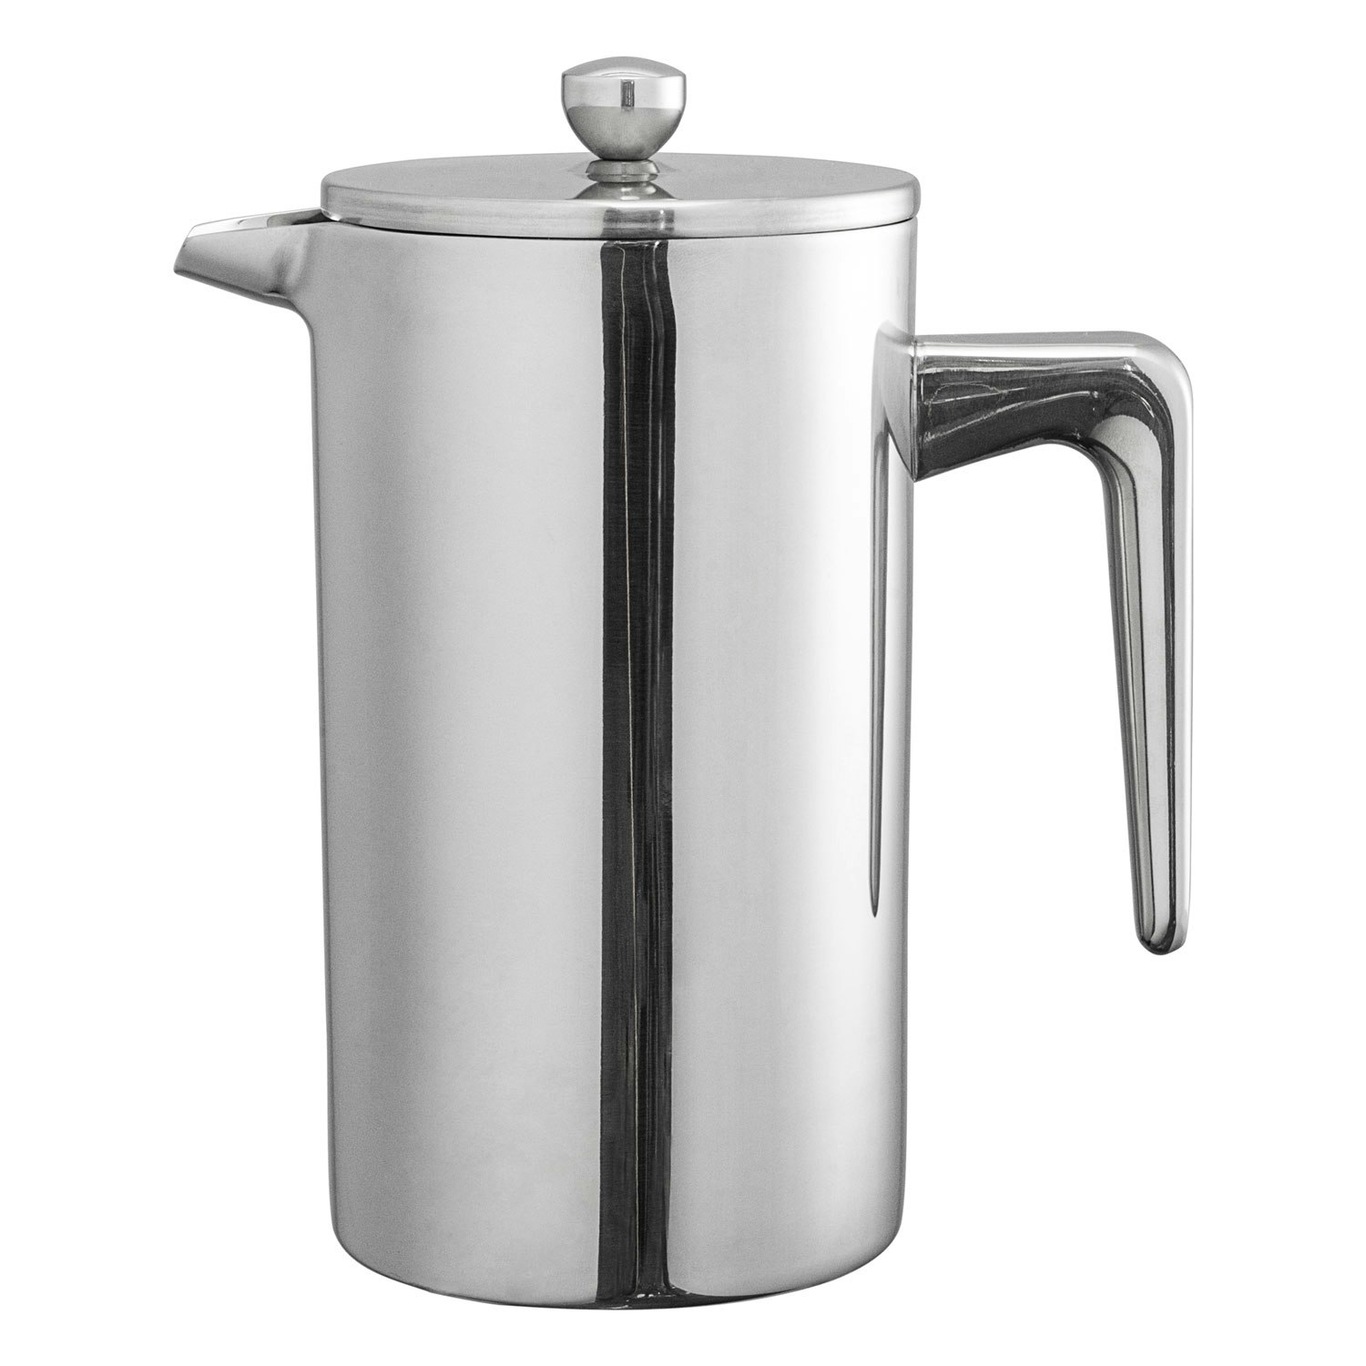 Heirol Pro Coffee Press 1 L - Thermoses Stainless Steel - 51108